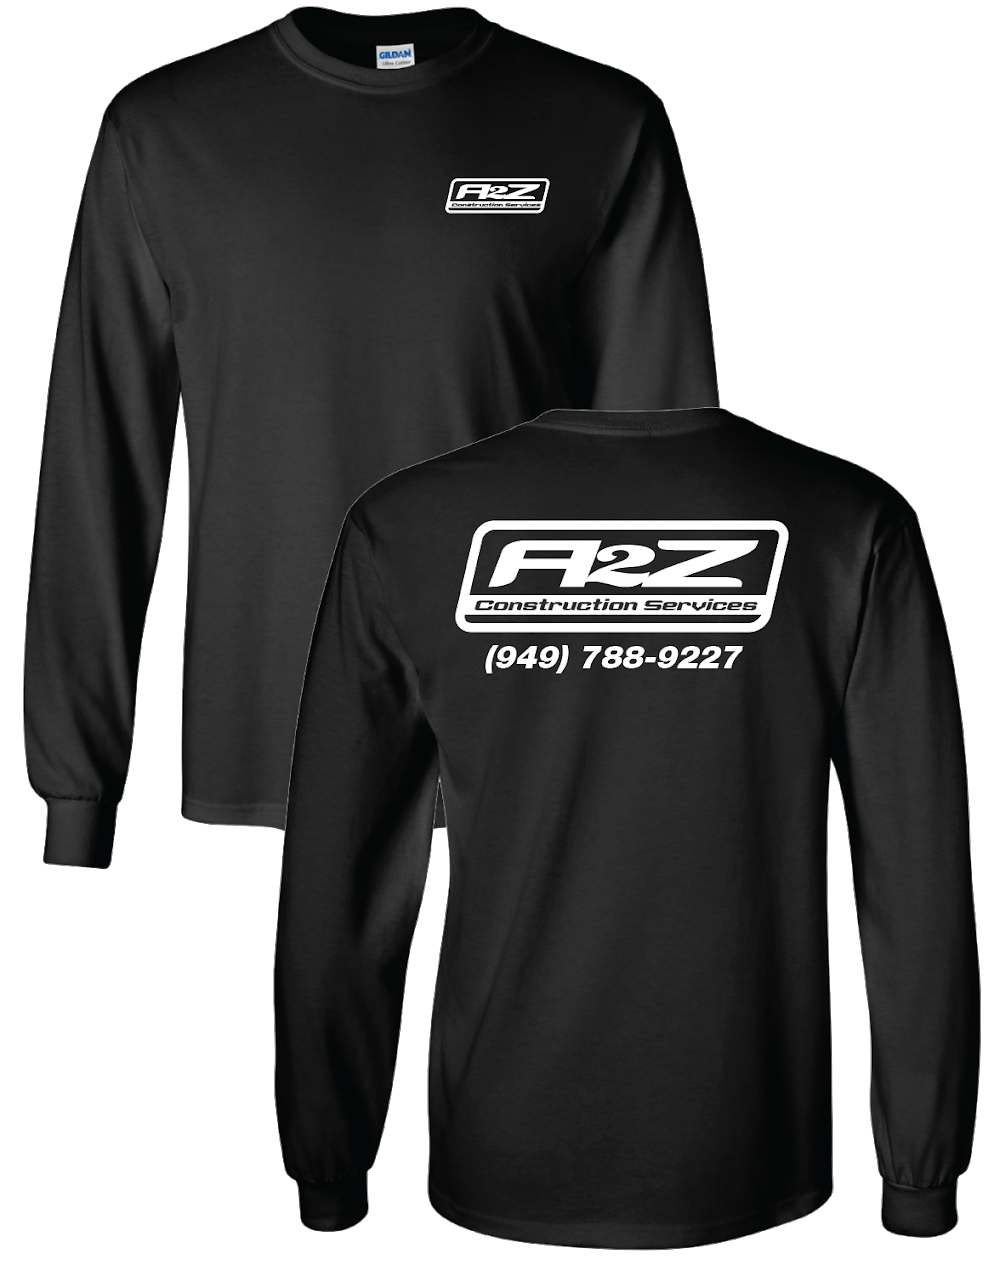 A2Z - Black Longsleeve (with White print)